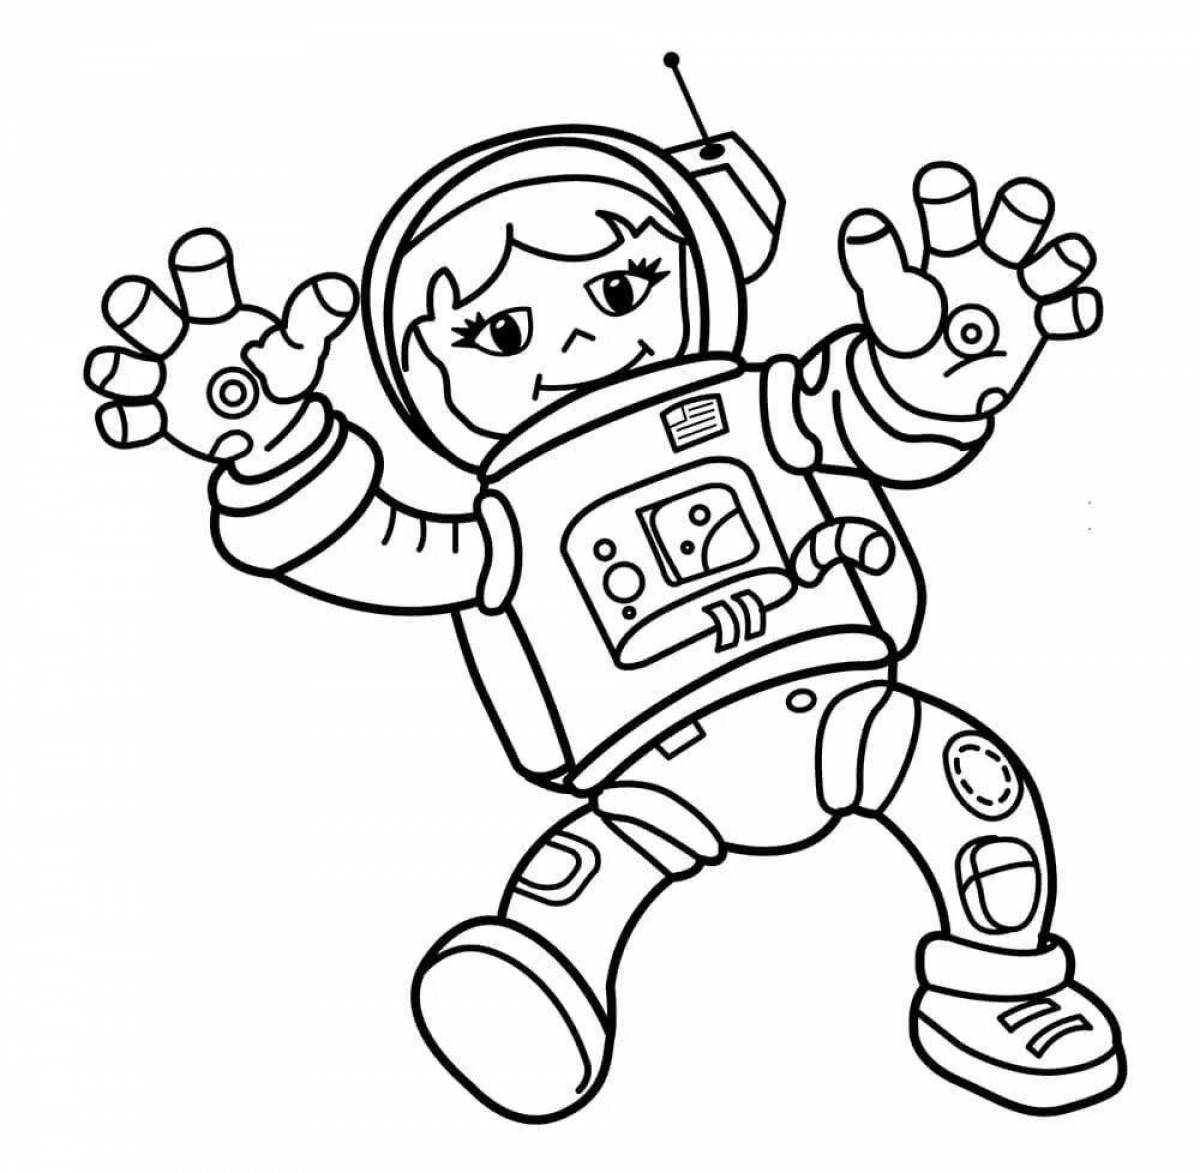 A famous astronaut coloring book for kids